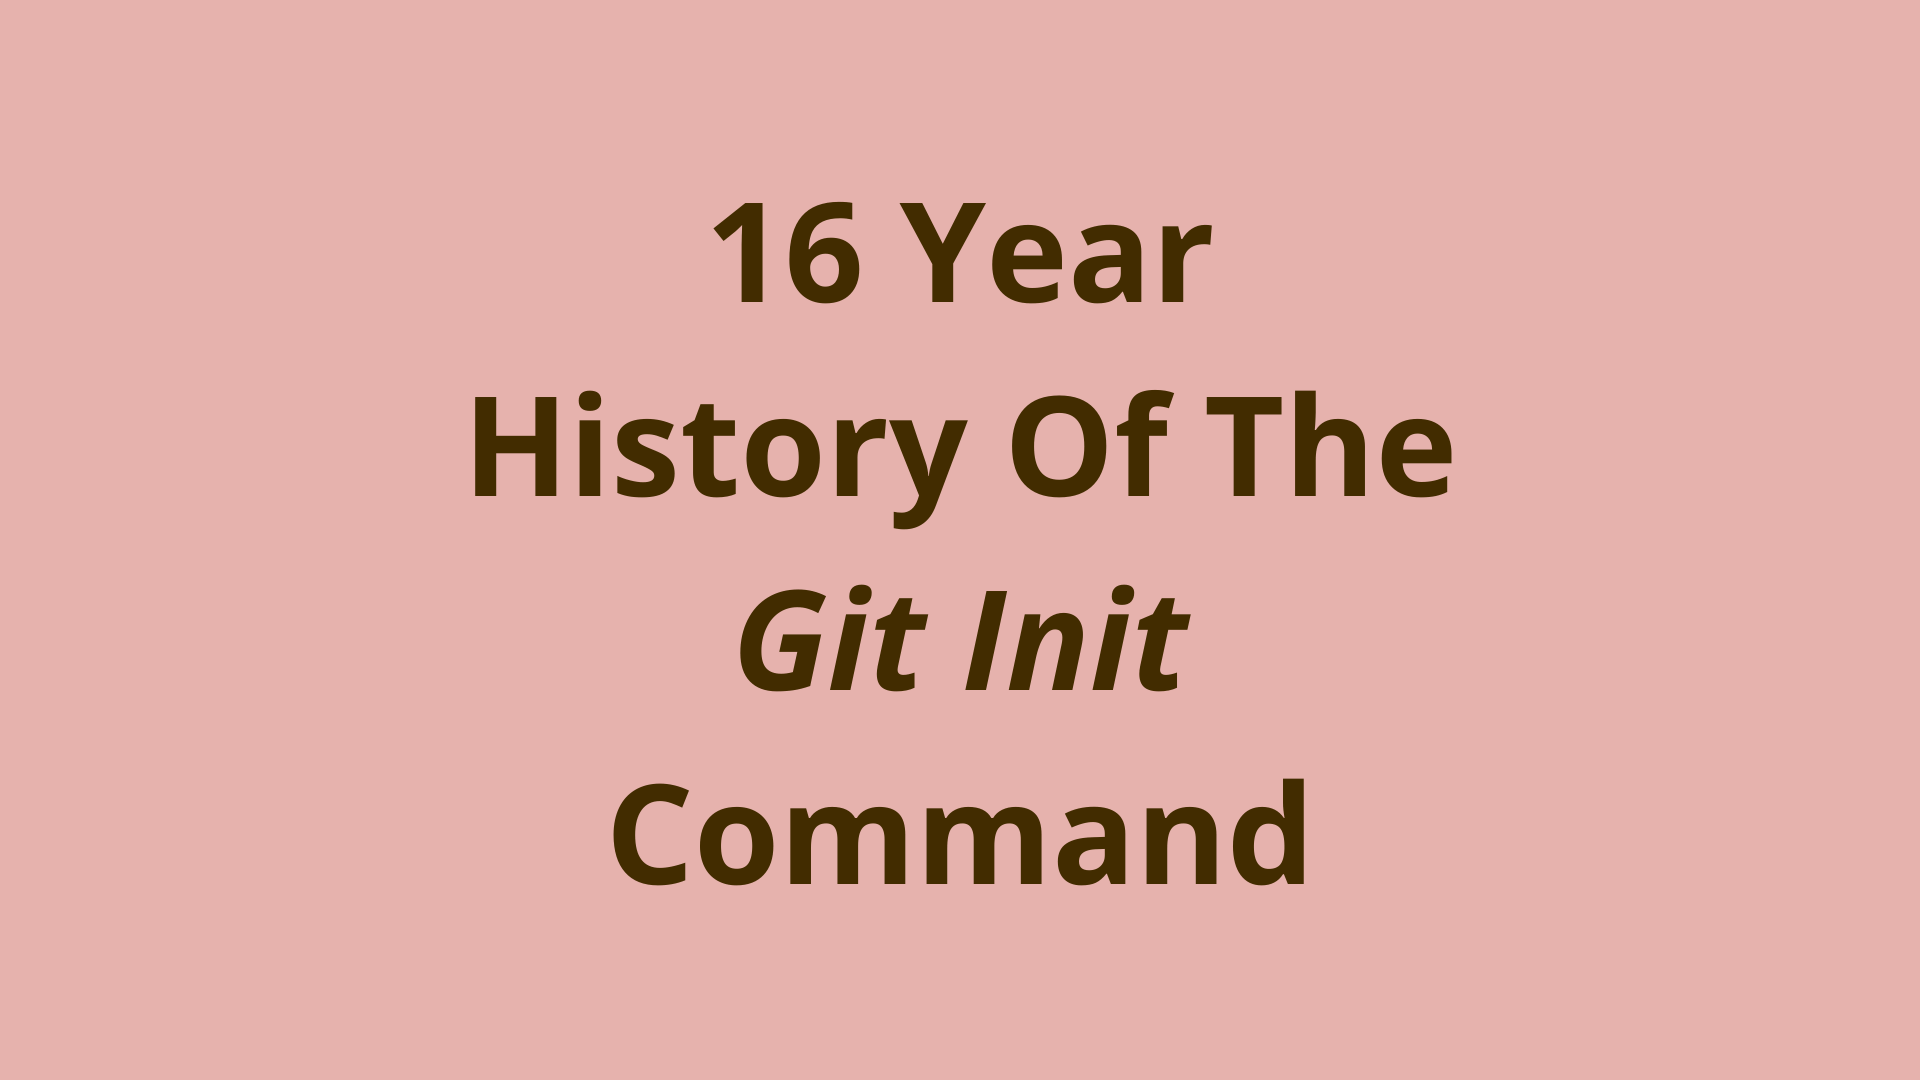 Image of A 16 Year History of the Git Init Command